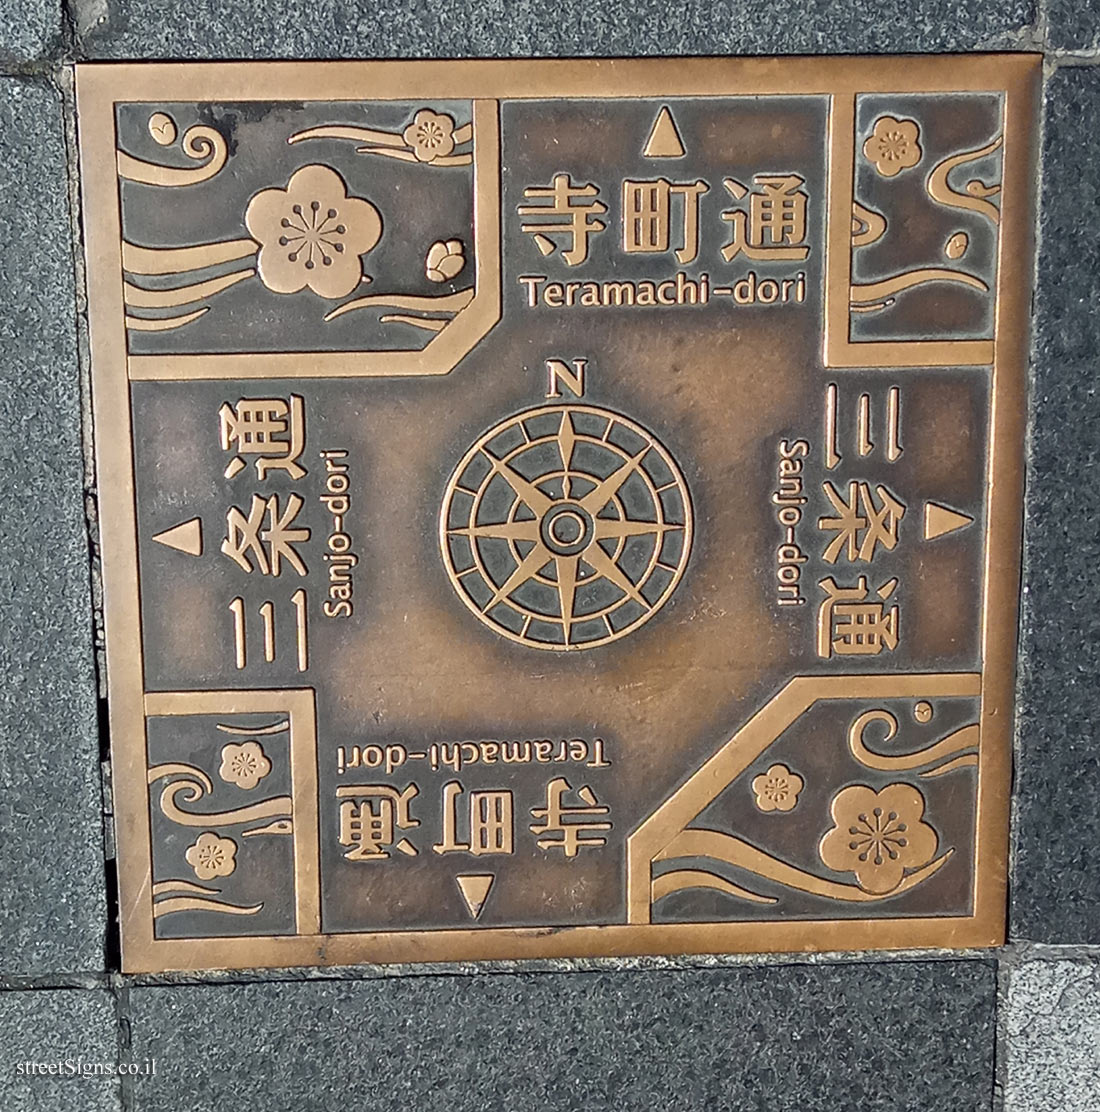 Kyoto - a direction sign pointing to city streets